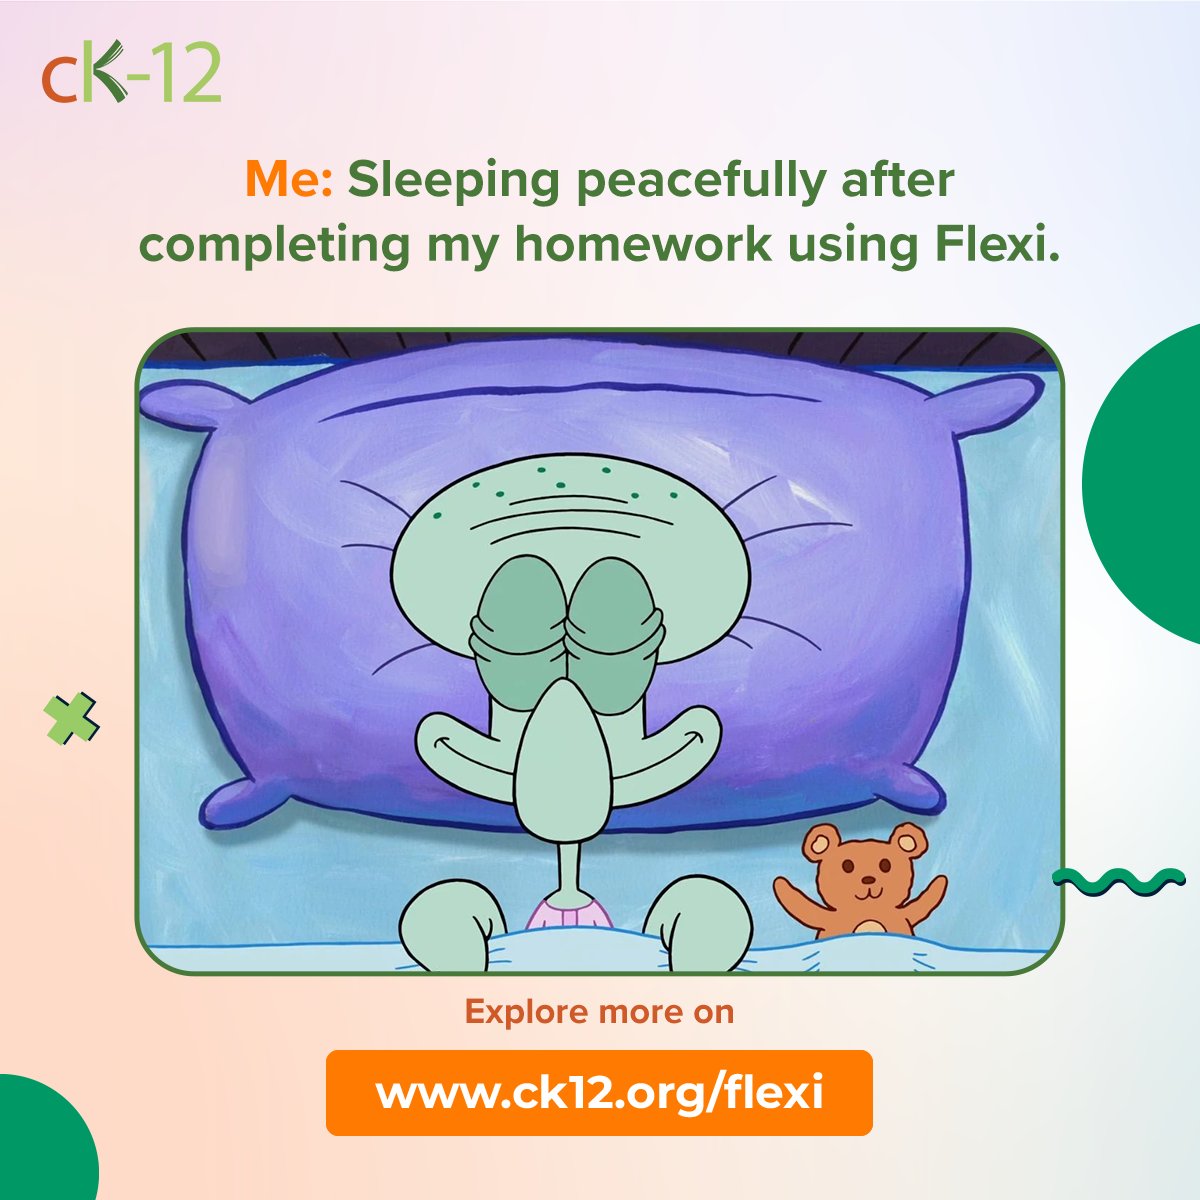 And that’s how it’s done! Get your homework and assignments done in a giffy with Flexi. Work smart not just hard! Visit ck12.org/flexi #EducationRevolutionized #LearnTheWayYouLike #Students #Education #Learning #LearningMadeFree